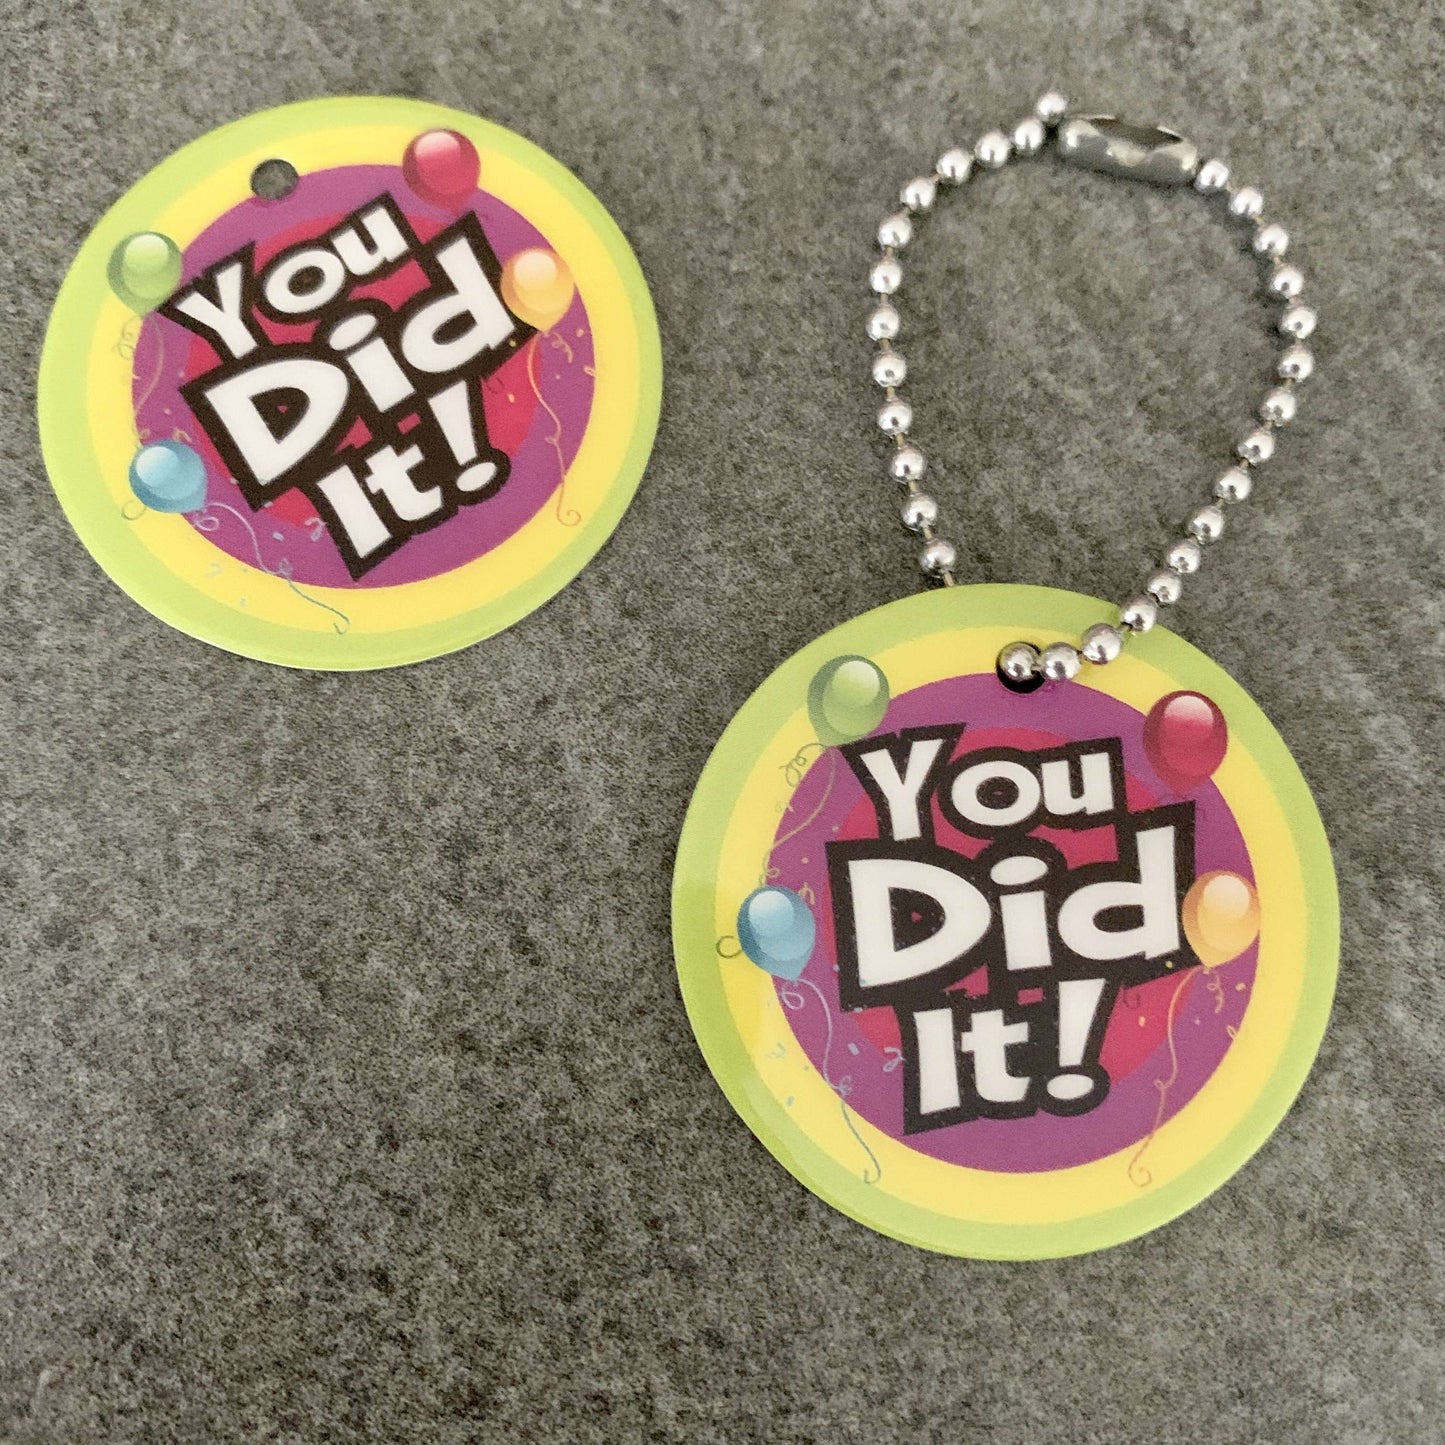 You Did It BragTags Classroom Rewards:Primary Classroom Resources